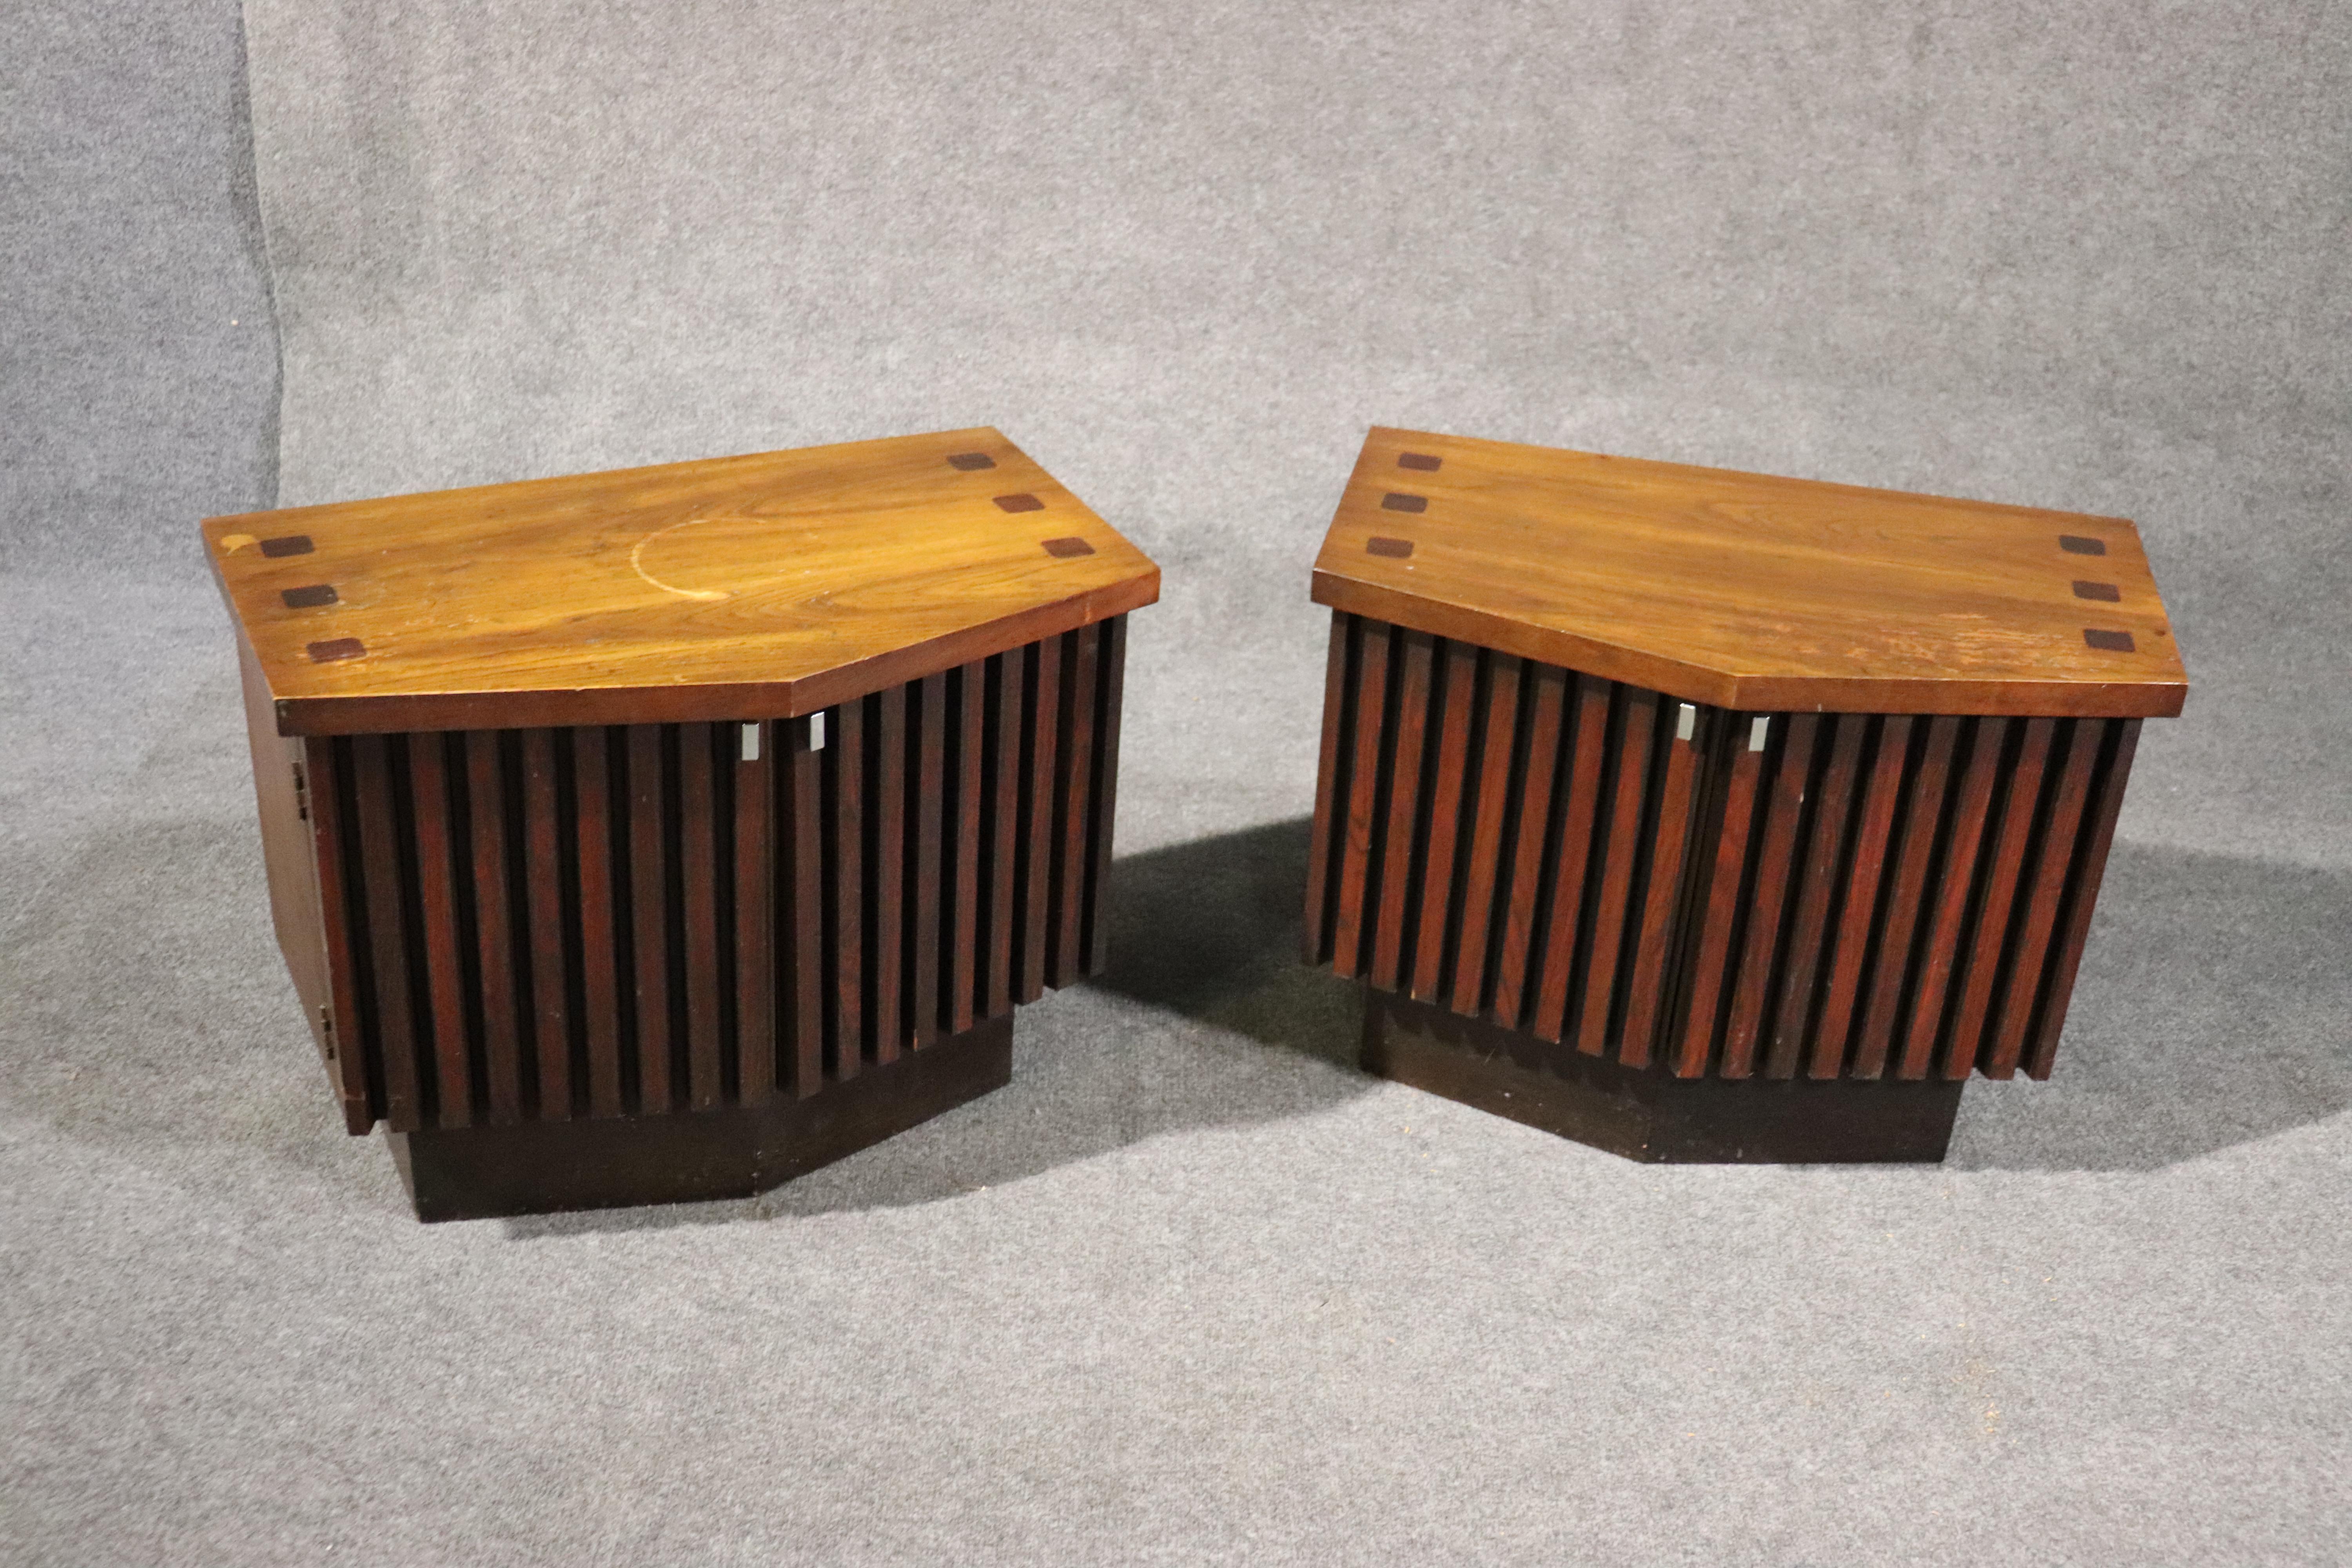 This is a gorgeous pair of lane Mid-Century Modern nightstands. The stands are part of a large King bedroom set I have listed as separate items. The stands do show some losses to the finish and signs of use. They each measure 22 tall x 28 wide x 18